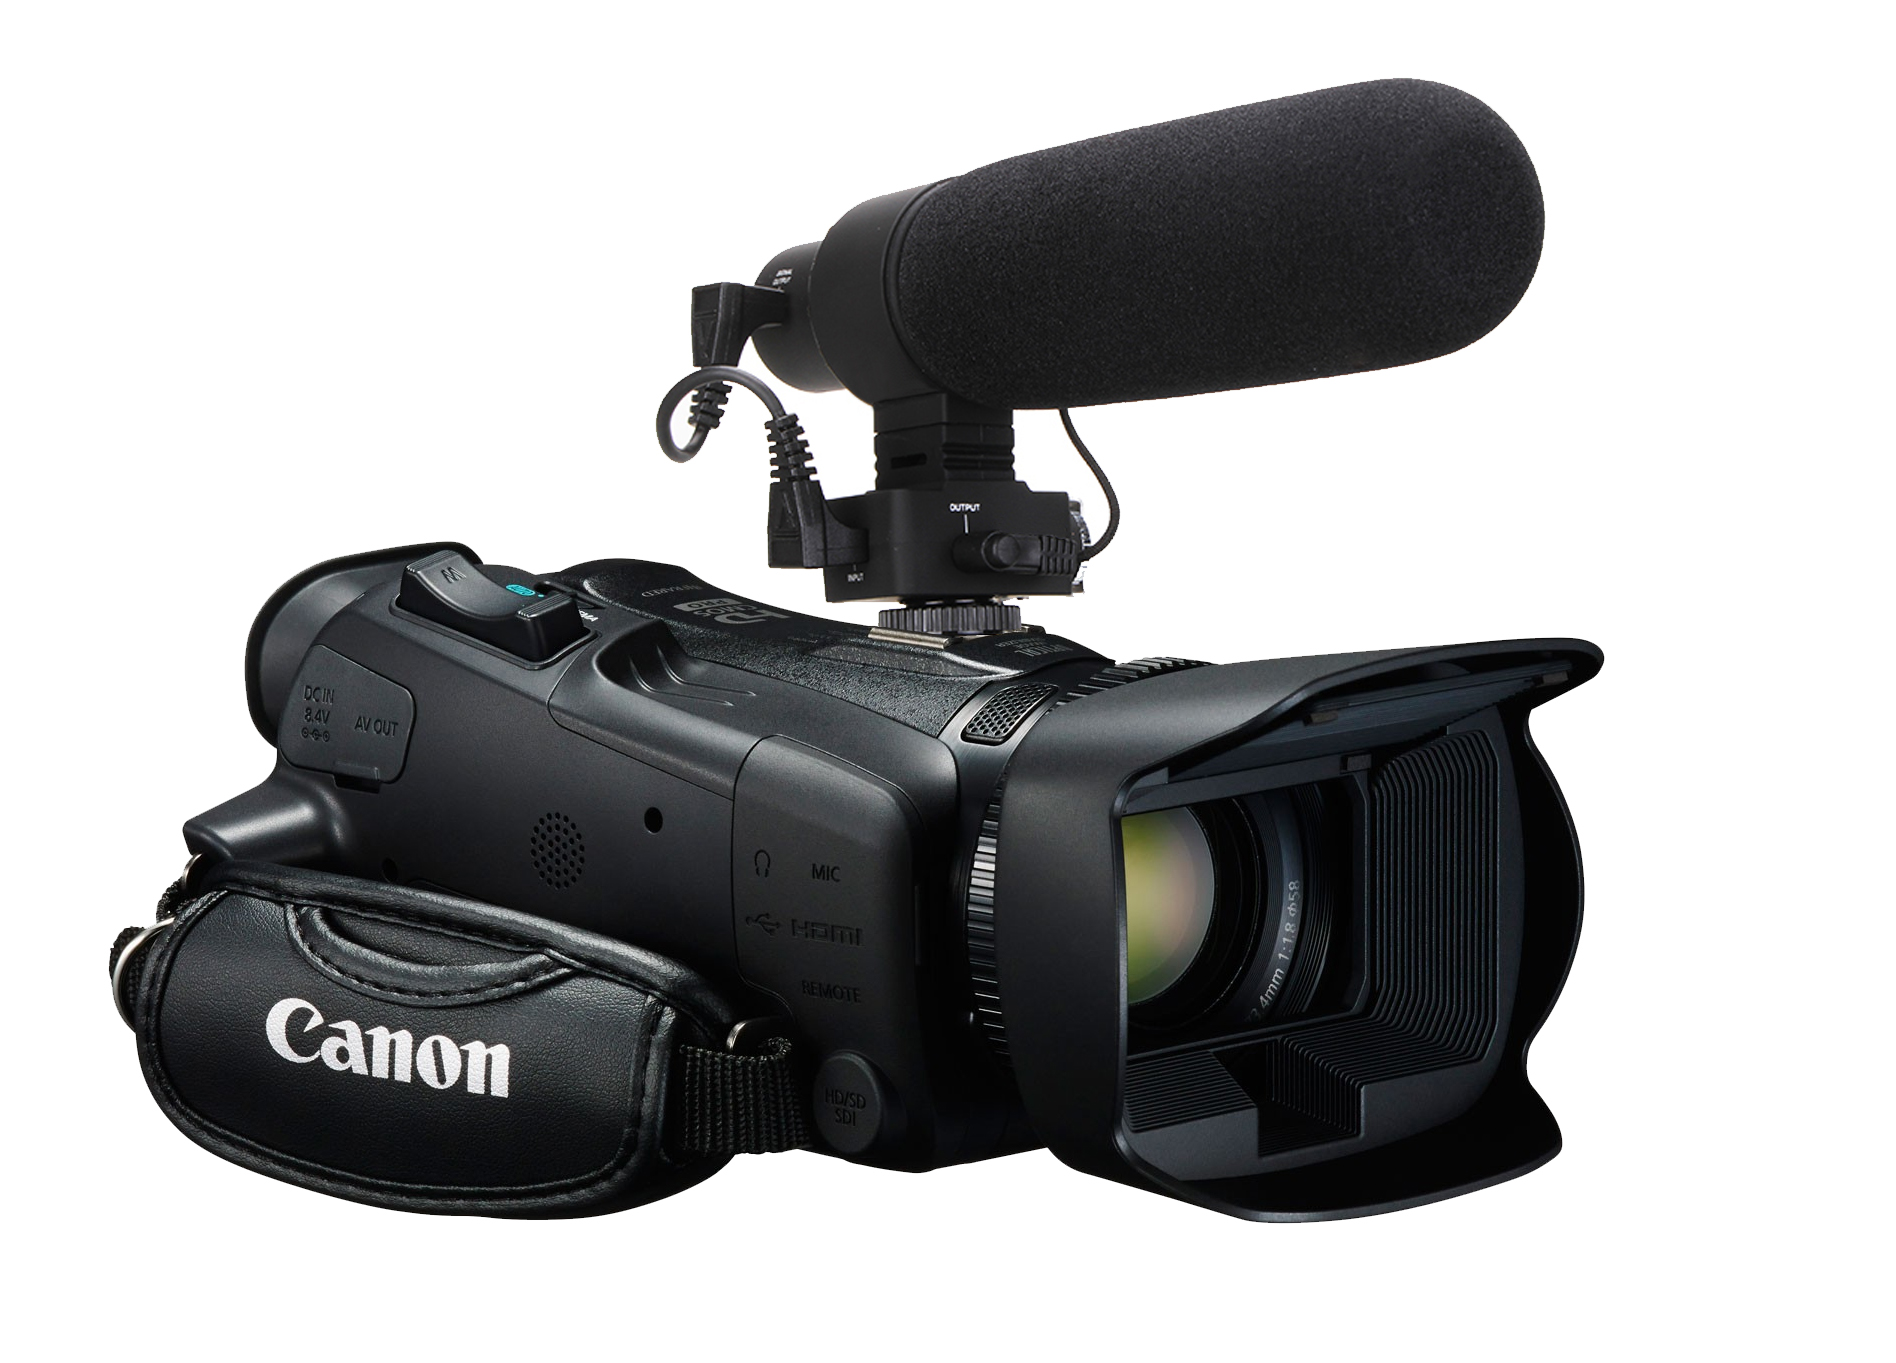 Sony HDR-CX675 Advanced Super Cardioid Microphone (Stereo/Shotgun) With Dead Cat Wind Muff - image 1 of 5